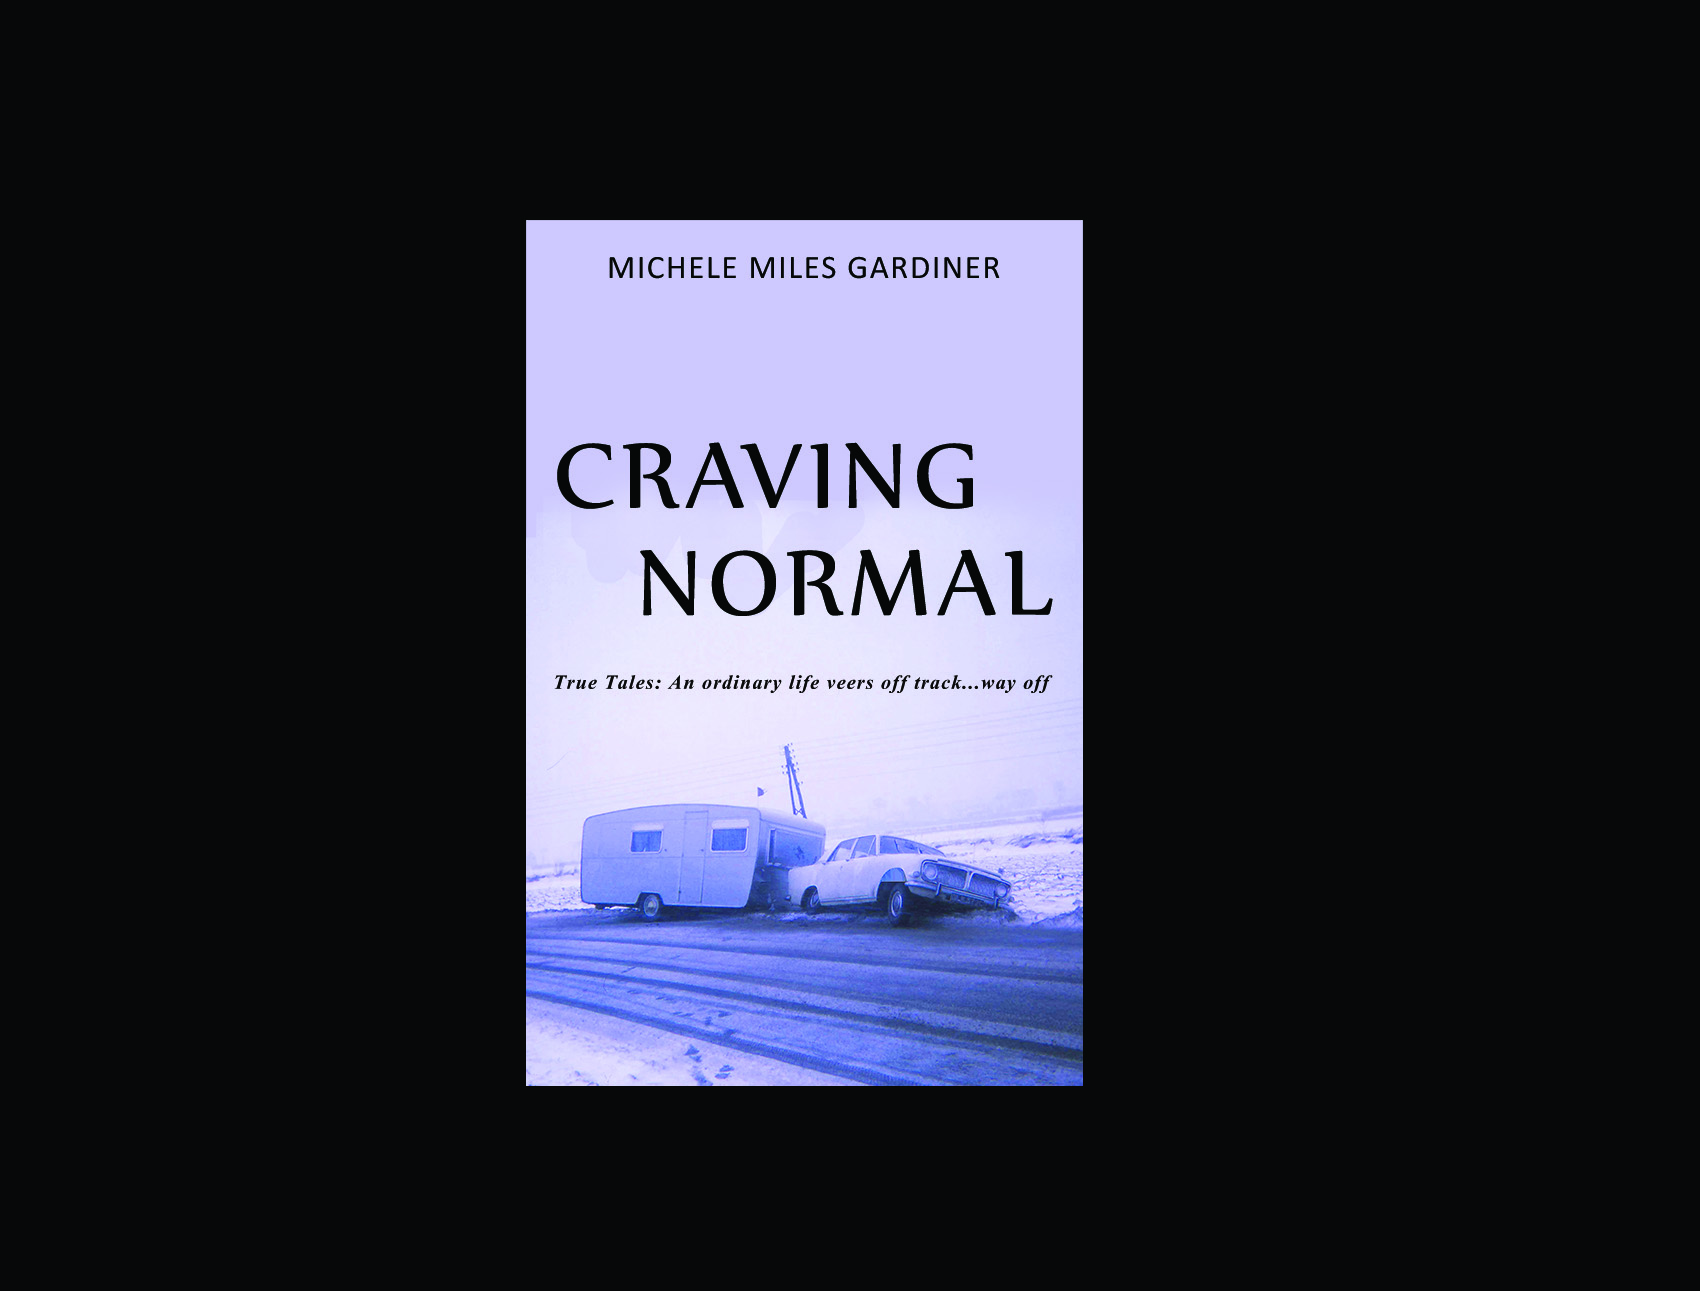 Craving Normal by Michele Miles Gardiner